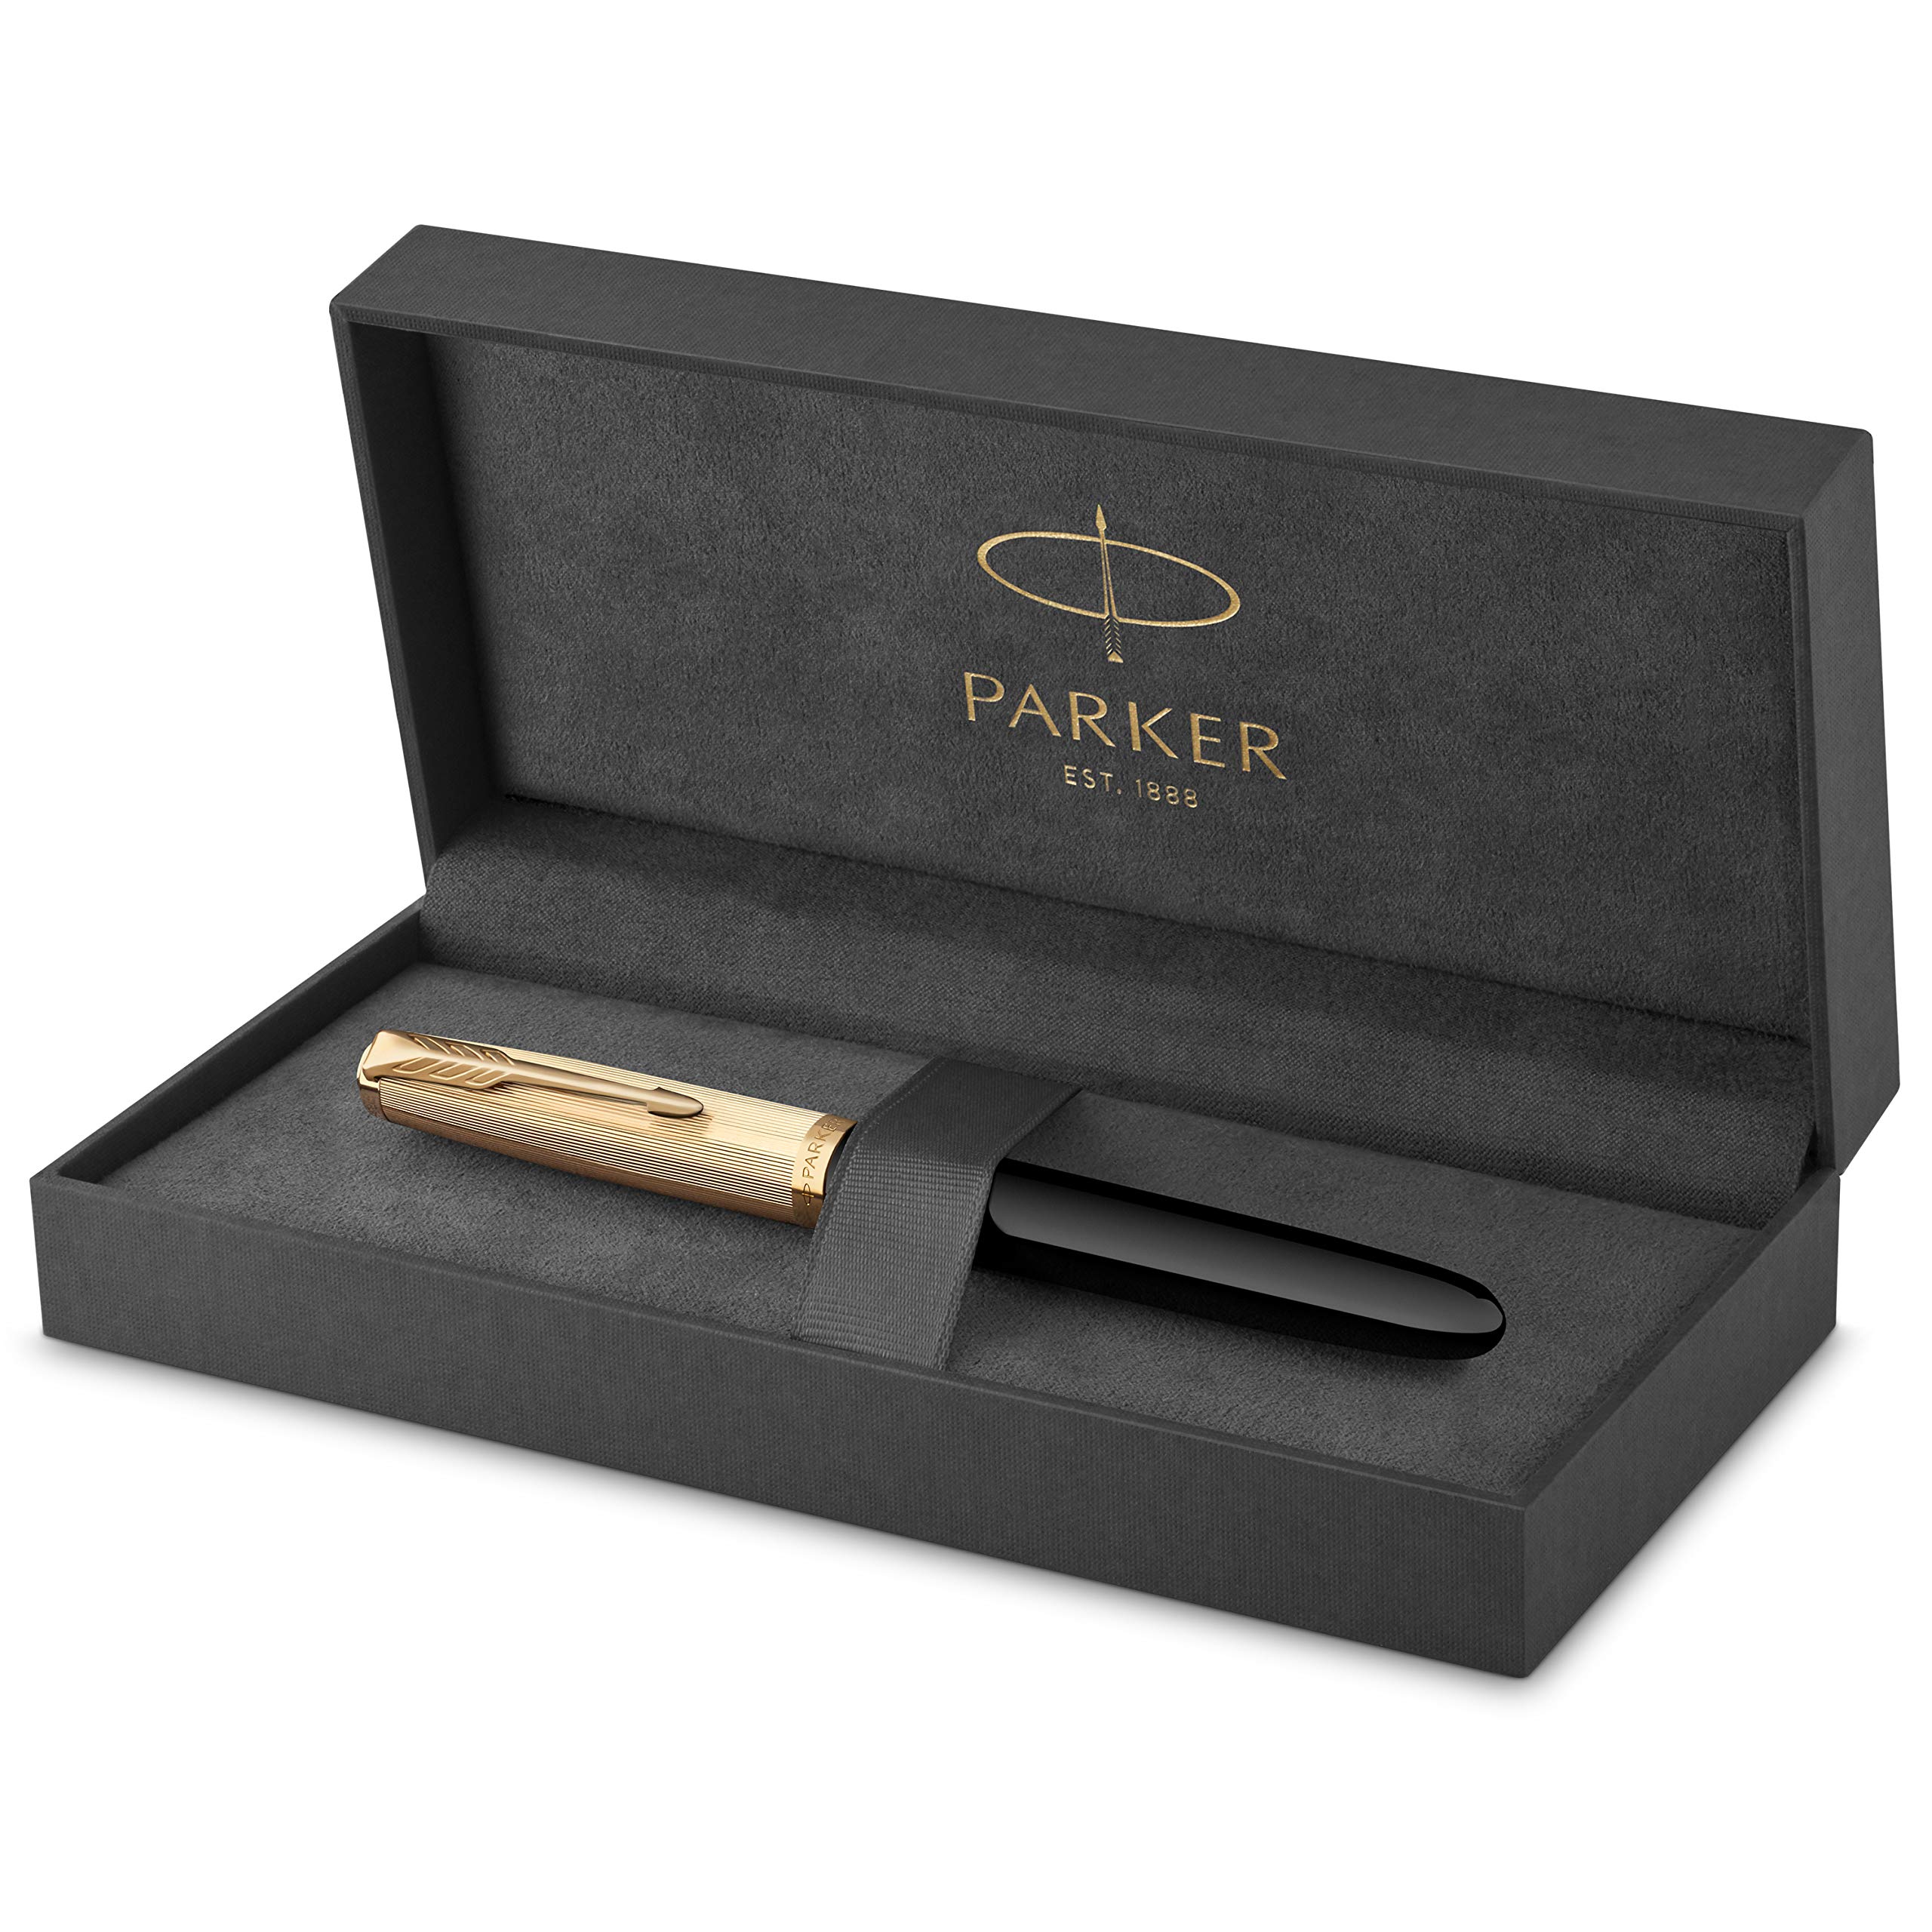 Faber-Castell Ambition Pearwood Rollerball by Faber-Castell　並行輸入品 - 1